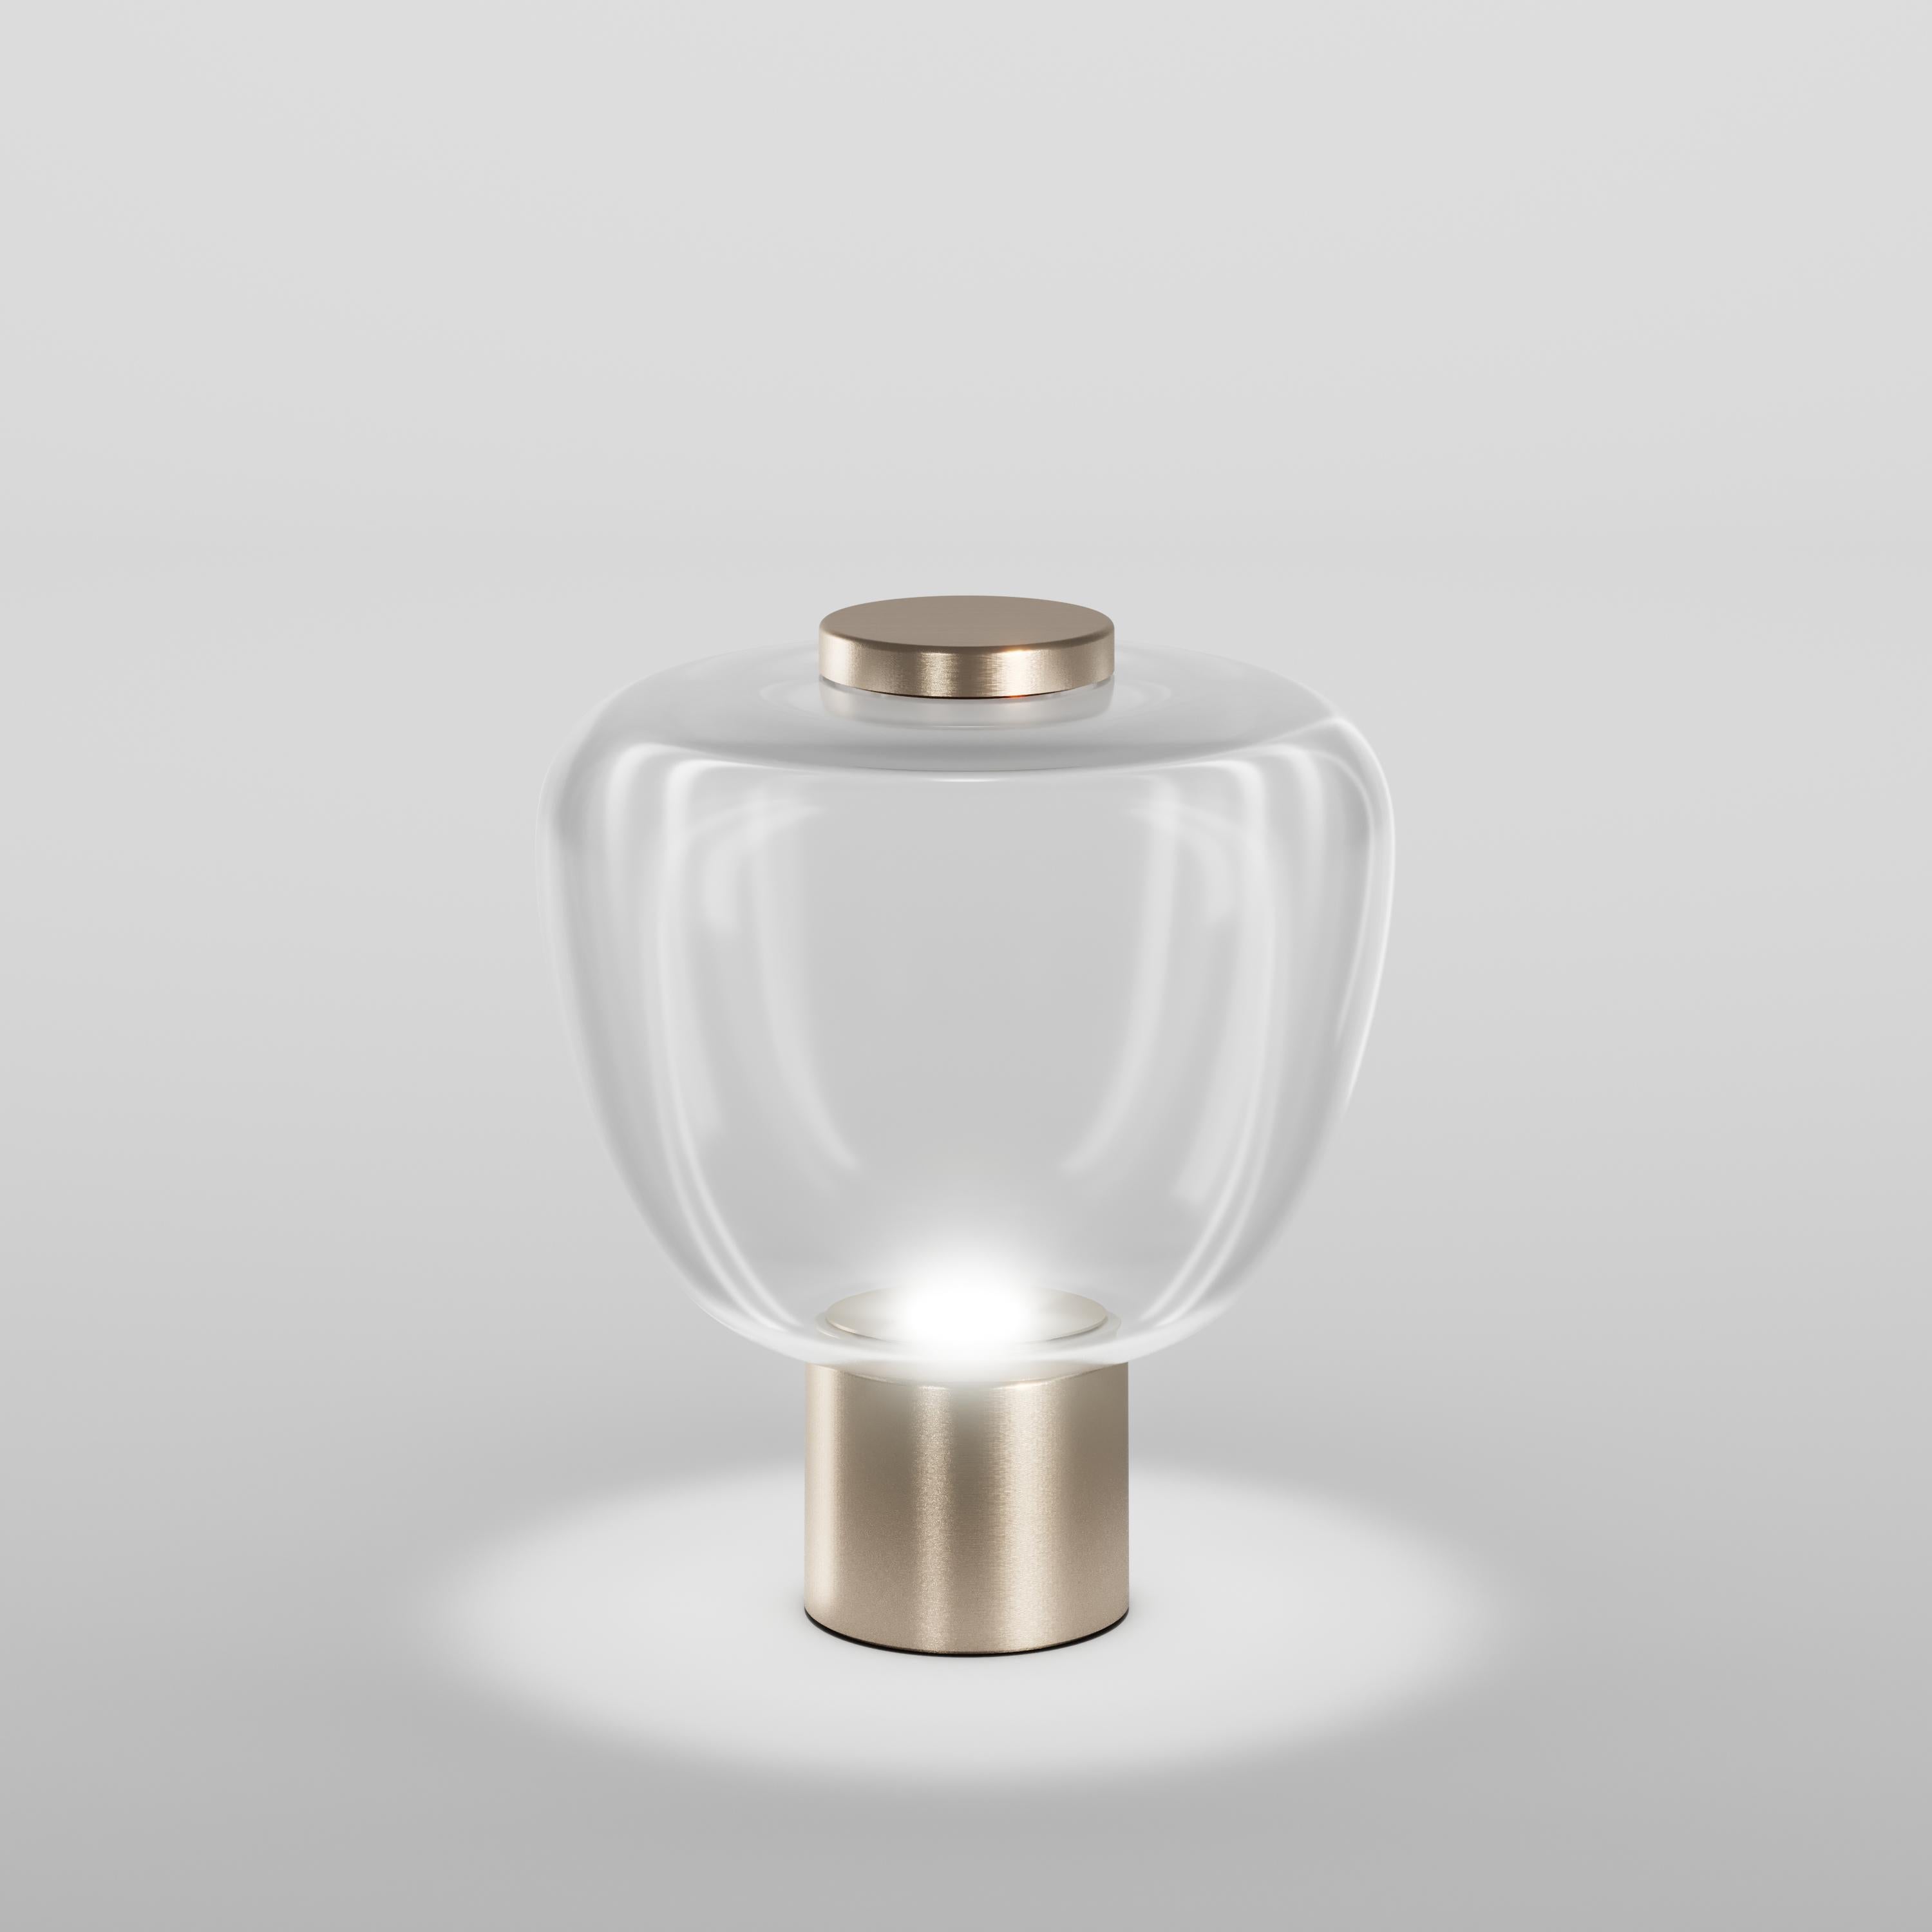 In the Riflesso collection the simplicity and lightness of glass become the main features with three different sinuous shapes. The silhouettes of the diffuser are enhanced by the LED light source.

Specifications:
Material: Glass
Light source: LED